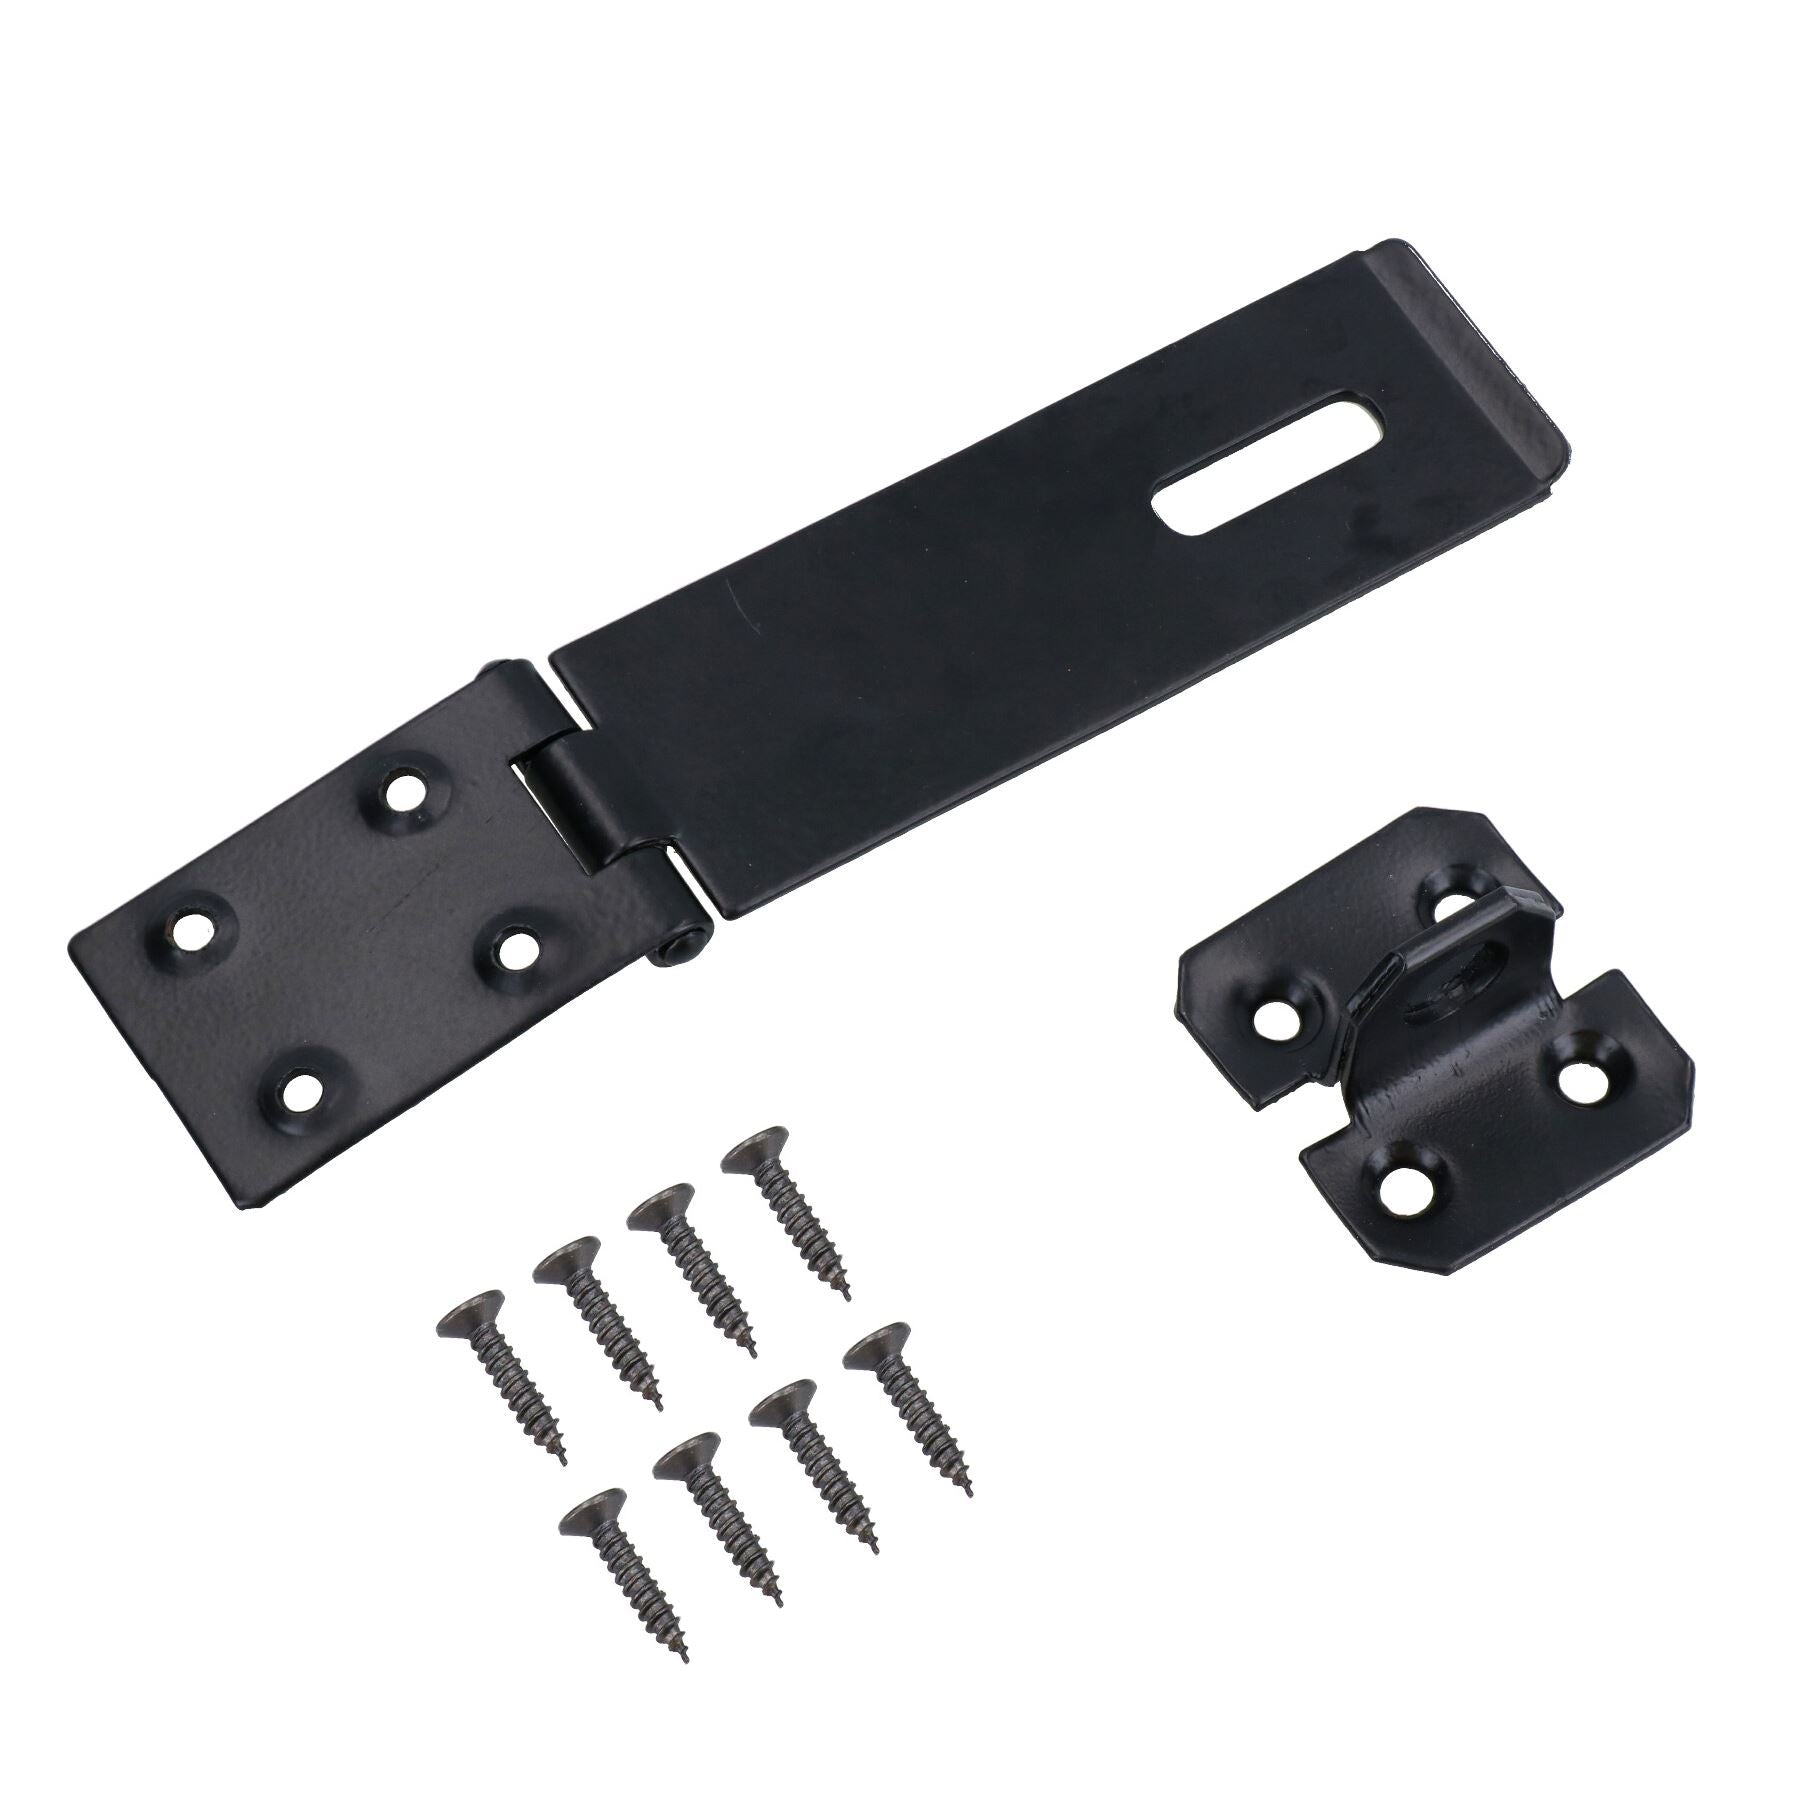 4” (100mm) heavy Duty Safety Hasp and Staple Security Lock for Gates Sheds Doors